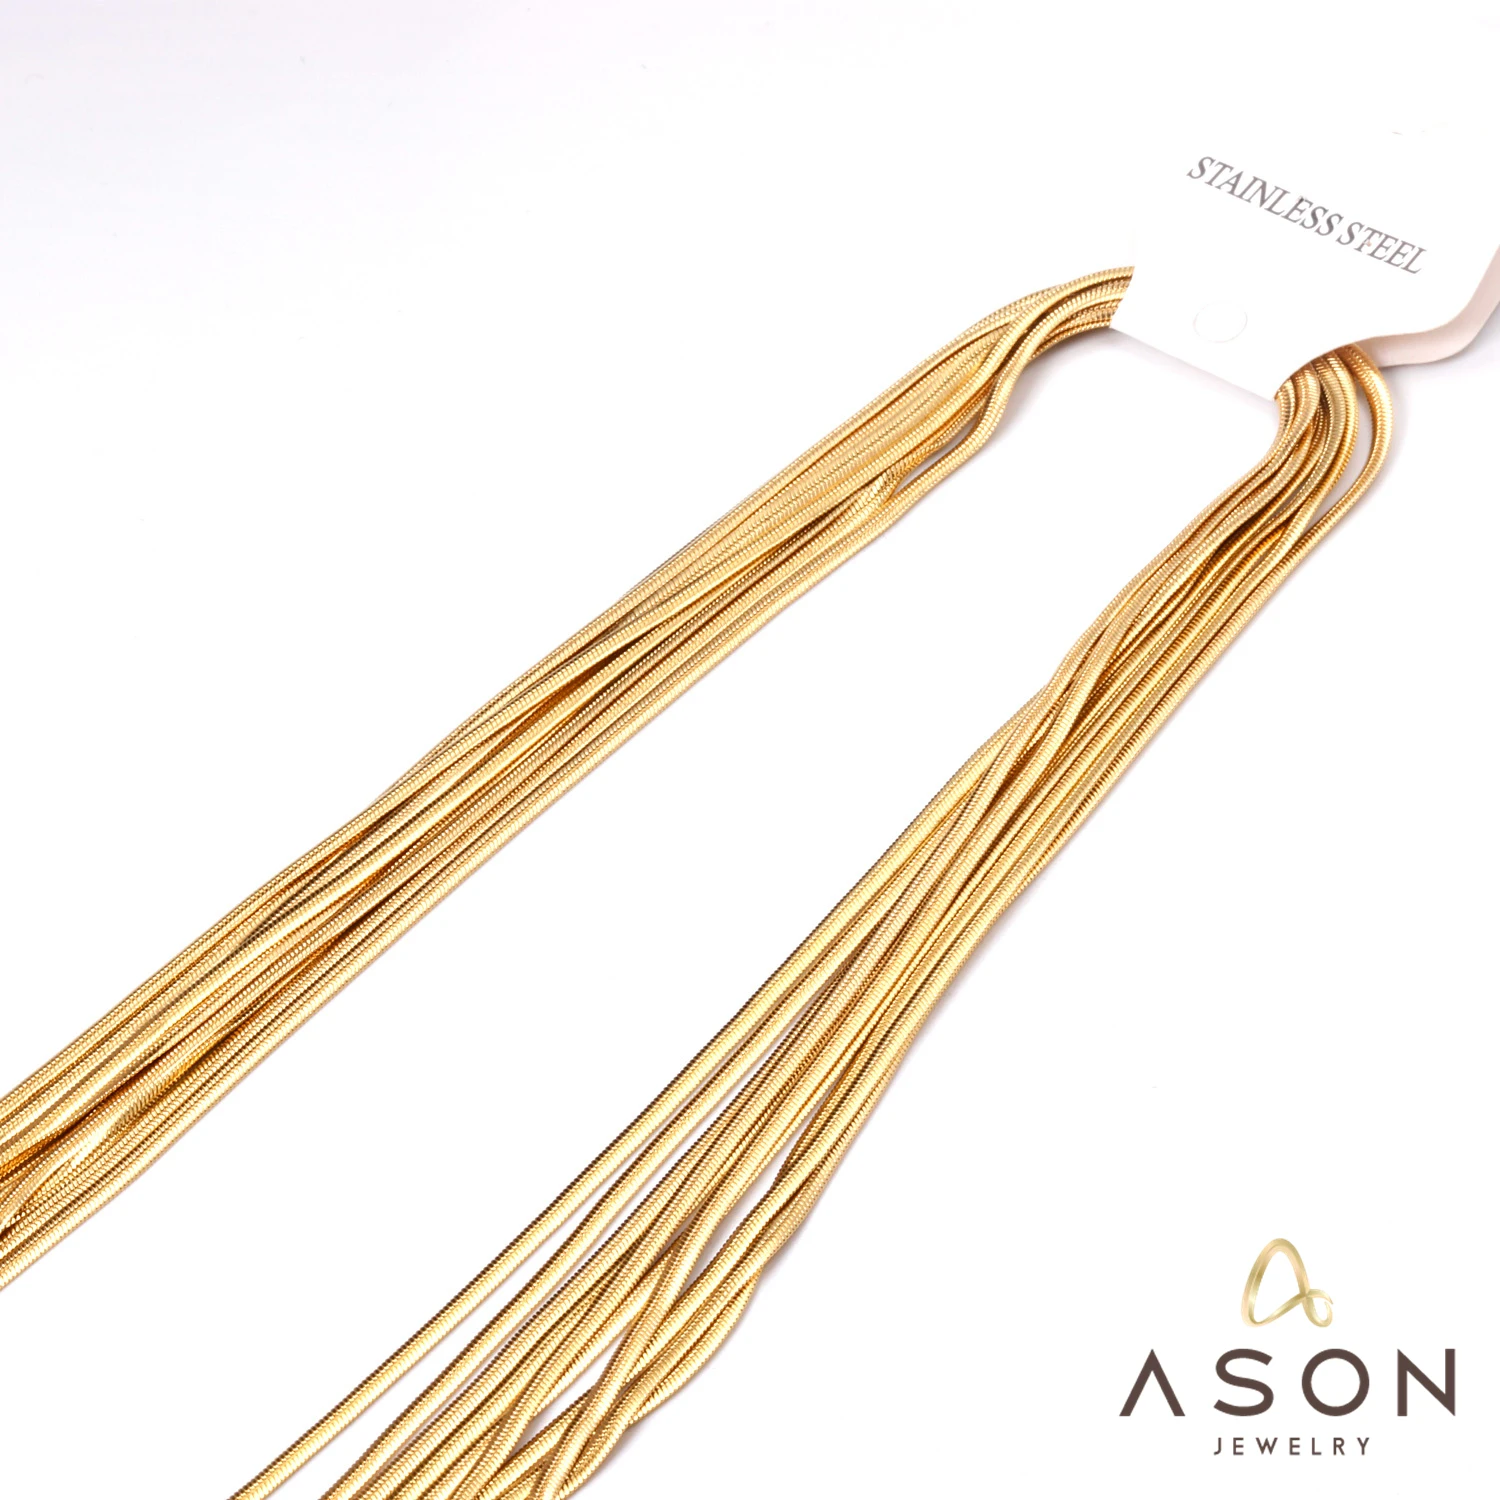 ASONSTEEL 10pcs/Lot 2mm Flat Snake Chain Necklace Stainless Steel Gold Color Wholesale Jewelry Chokers for Women Men Bulk Sale